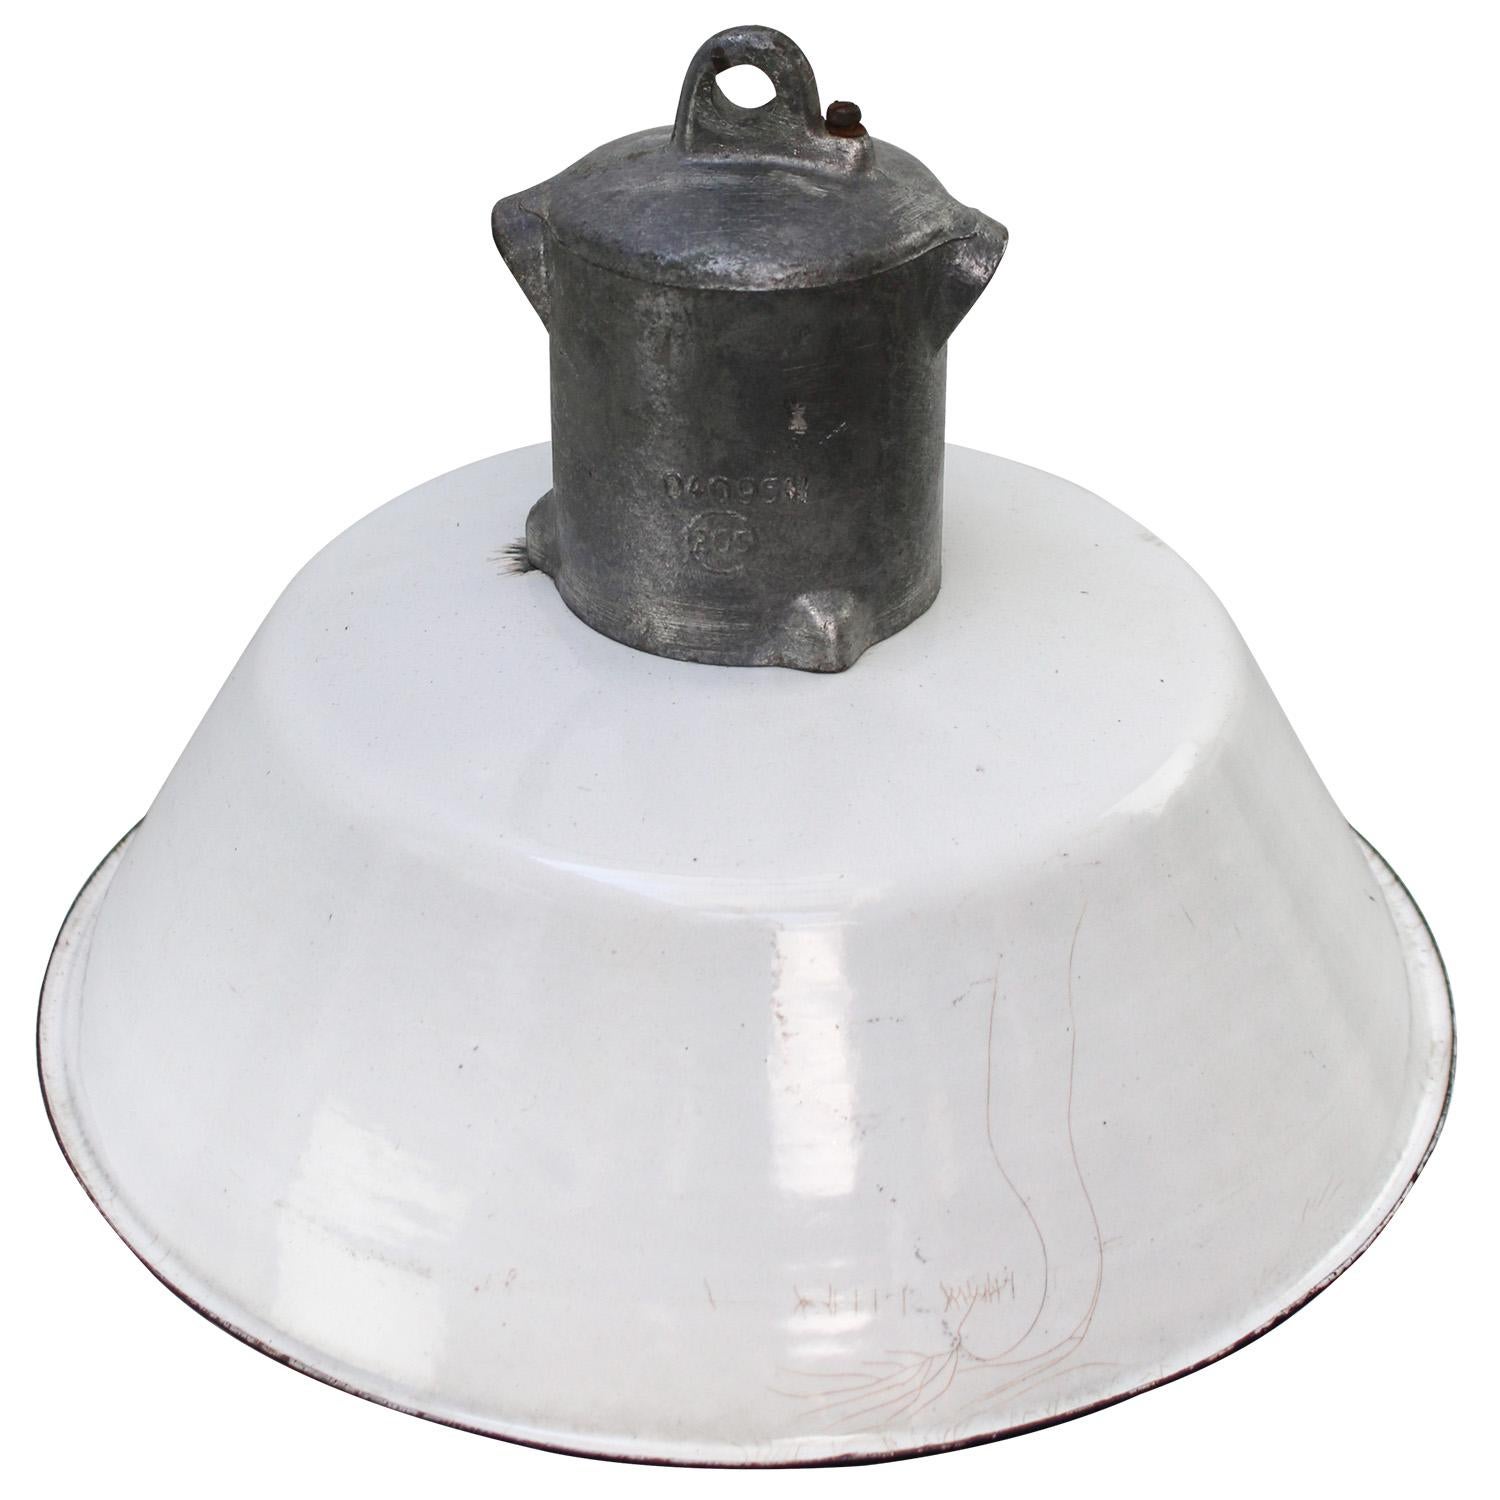 Factory hanging light
Gray cast aluminum top with white enamel shade

Weight 1.50 kg / 3.3 lb

Priced per individual item. All lamps have been made suitable by international standards for incandescent light bulbs, energy-efficient and LED bulbs.